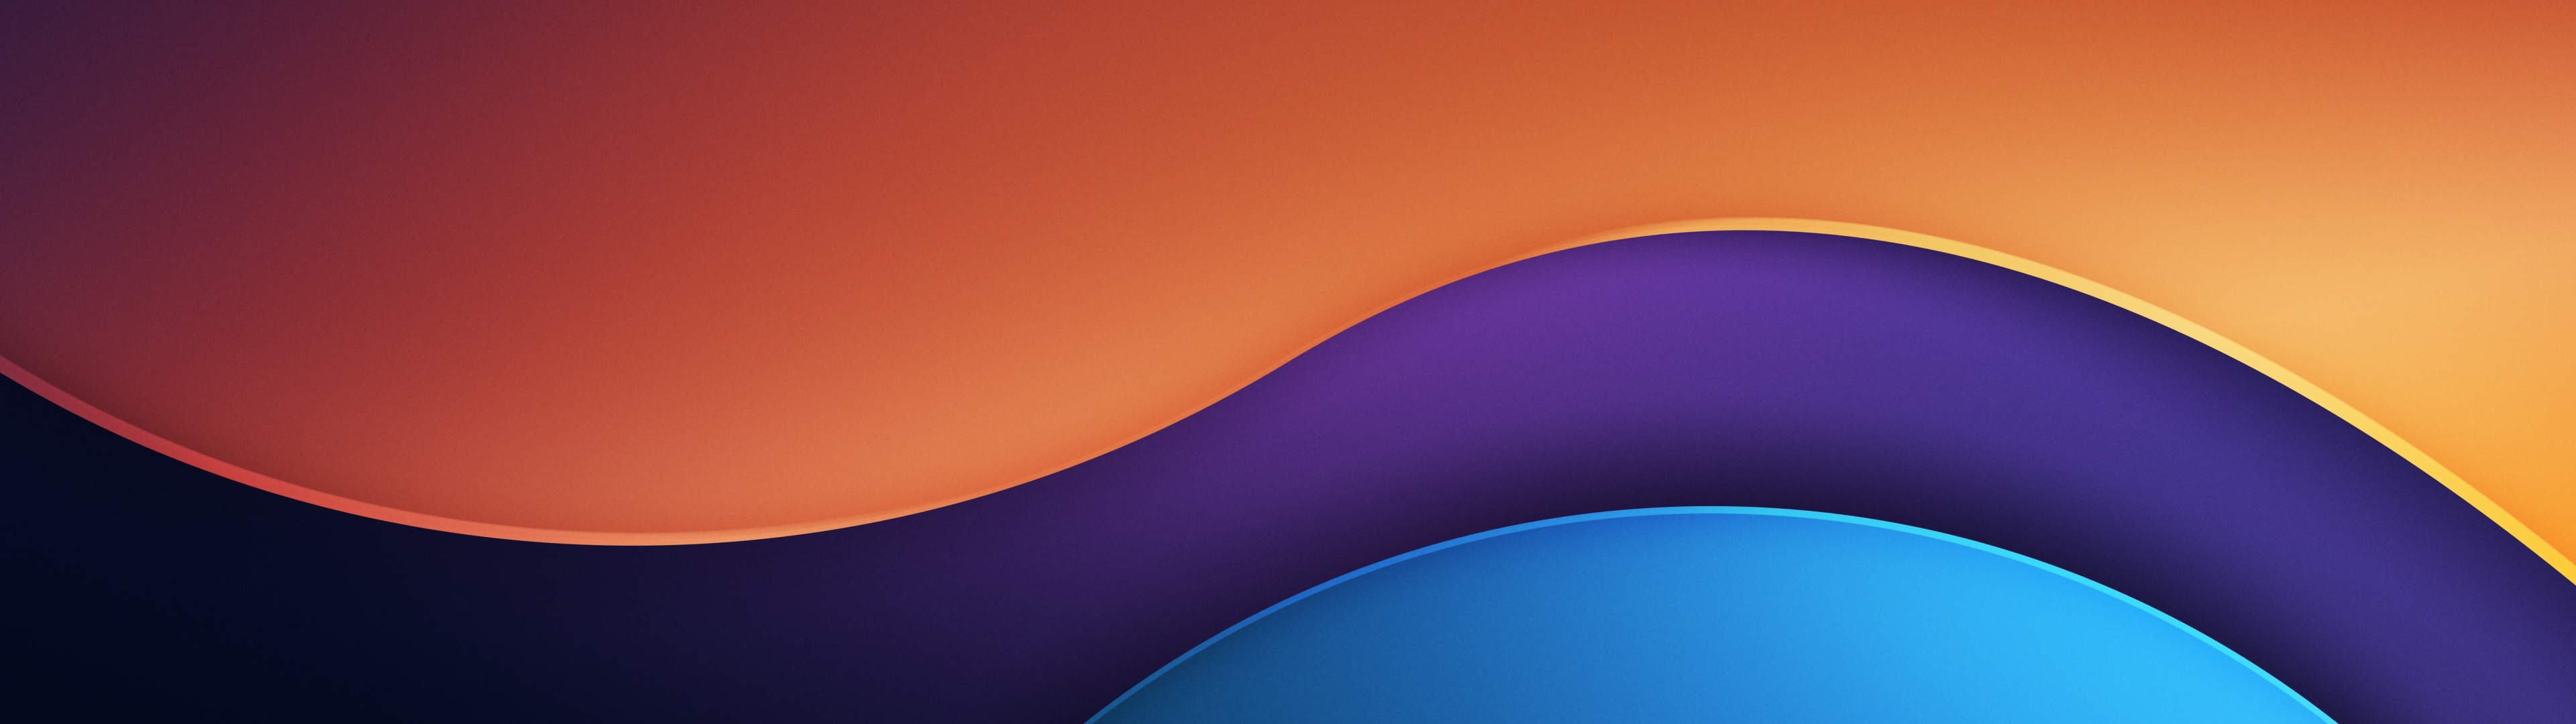 Purple and Orange Backgrounds 50 pictures